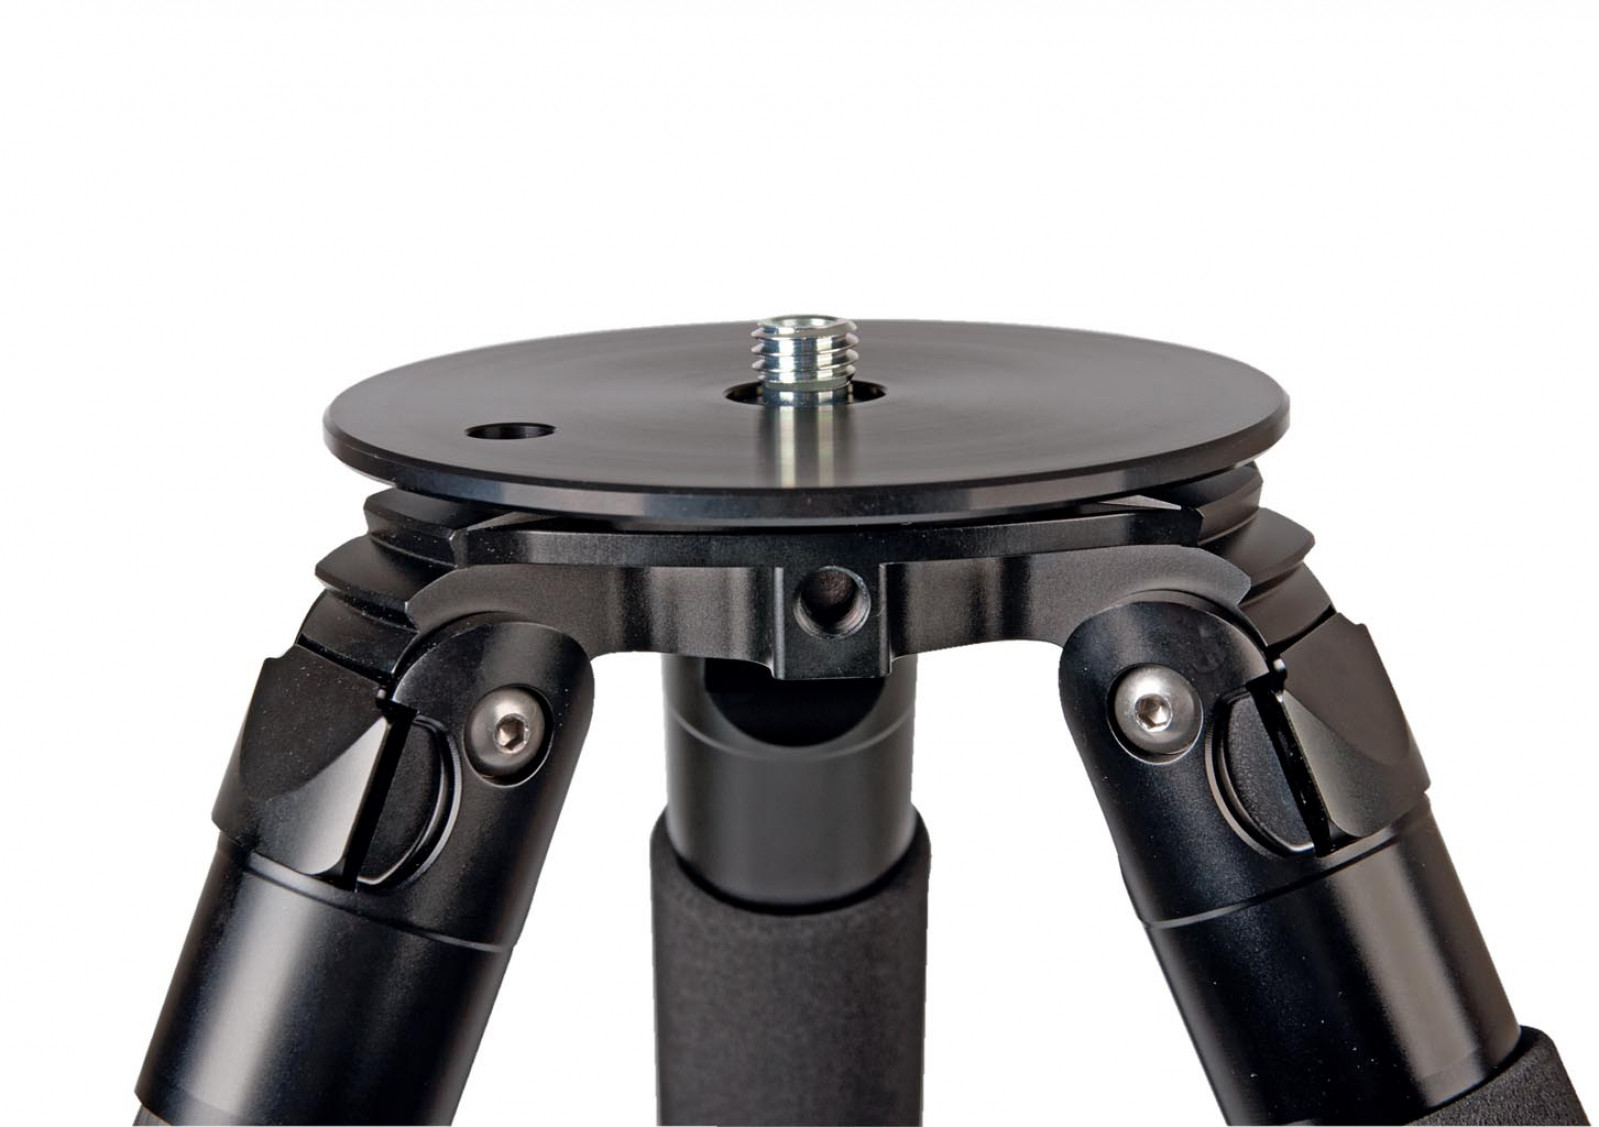 Artec 3D launches state-of-the-art tripods and dol...